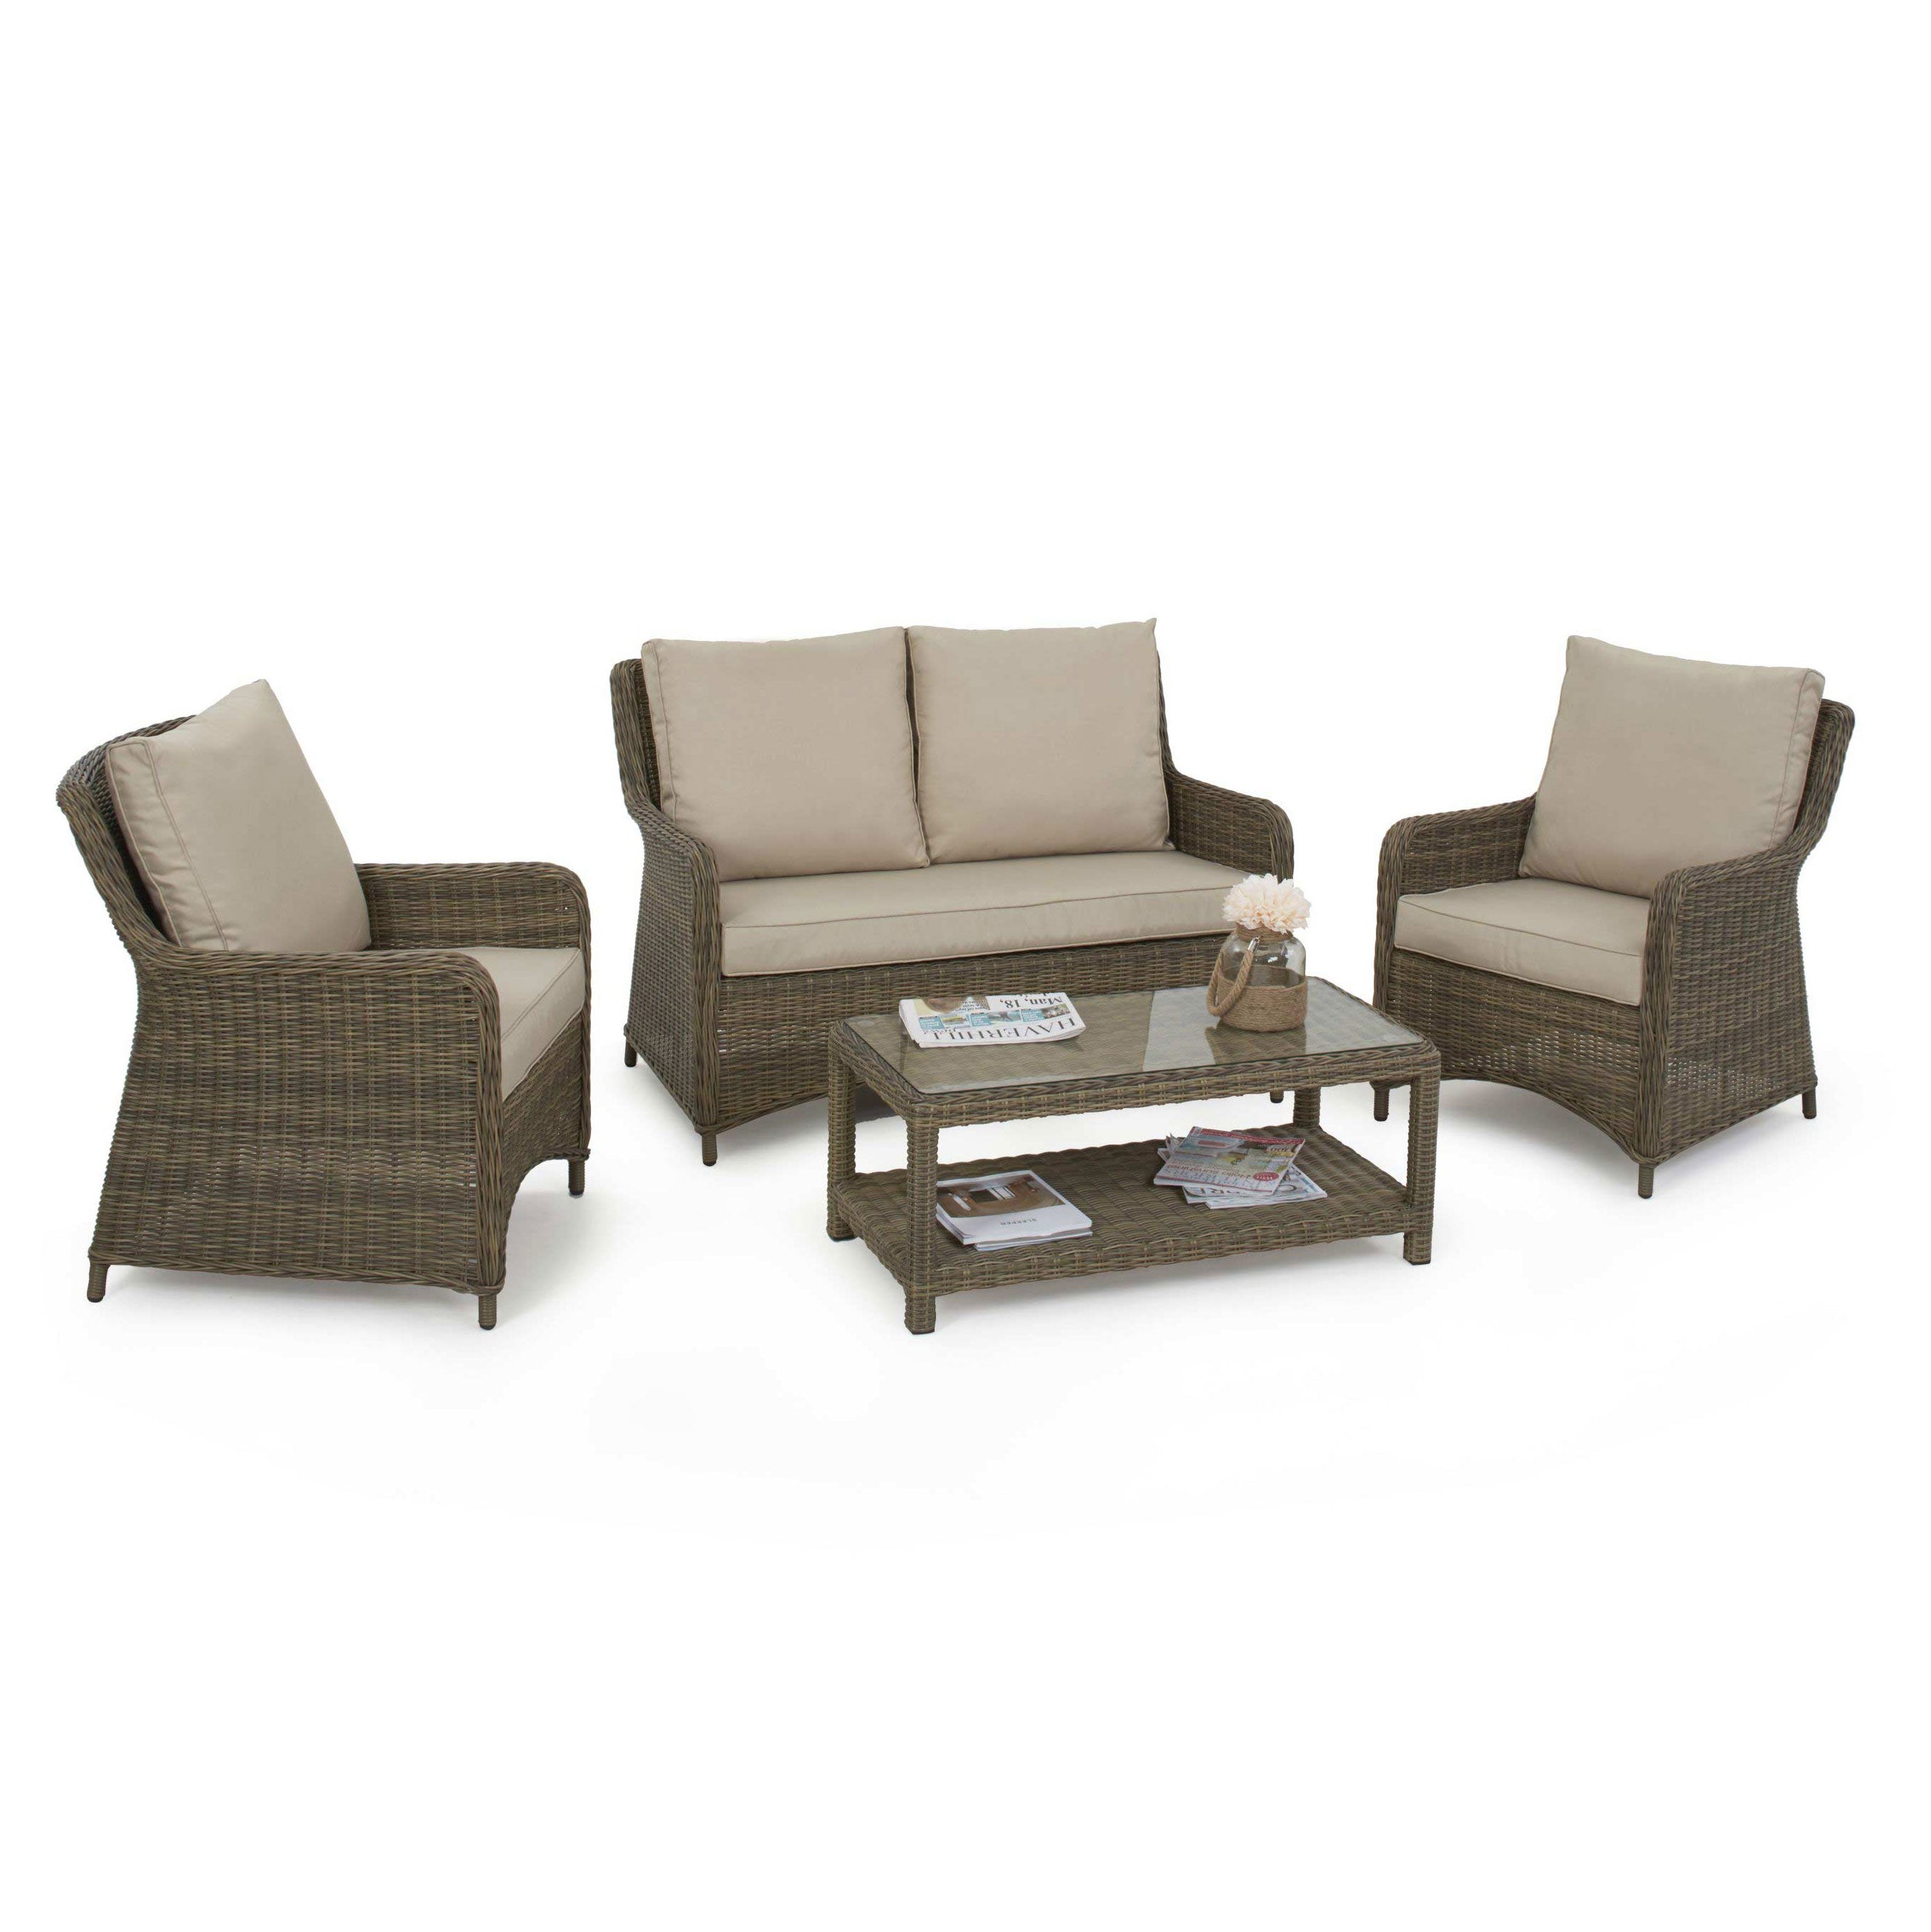 Natural coloured rattan 2 seat sofa with two arm chairs and a rectangle coffee table.